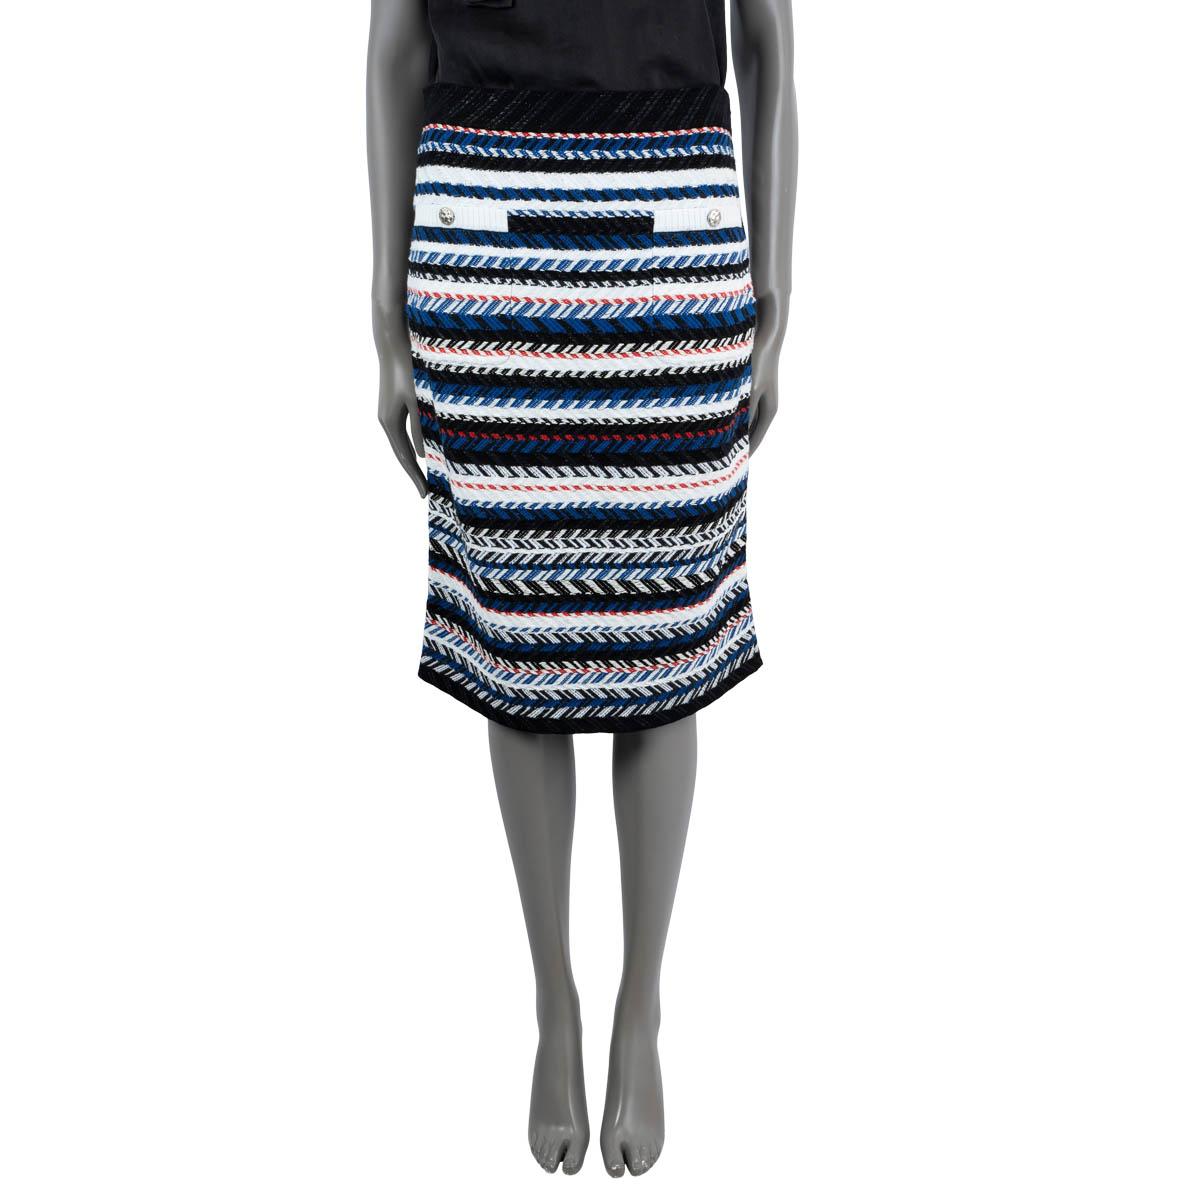 100% authentic Chanel chevron striped tweed skirt in blue, white black and red cotton (97%), polyester (2%) and rayon (1%). Features two buttoned pockets on the front and three silver-tone metal buttons in the back. Opens with a side zip. Unlined.